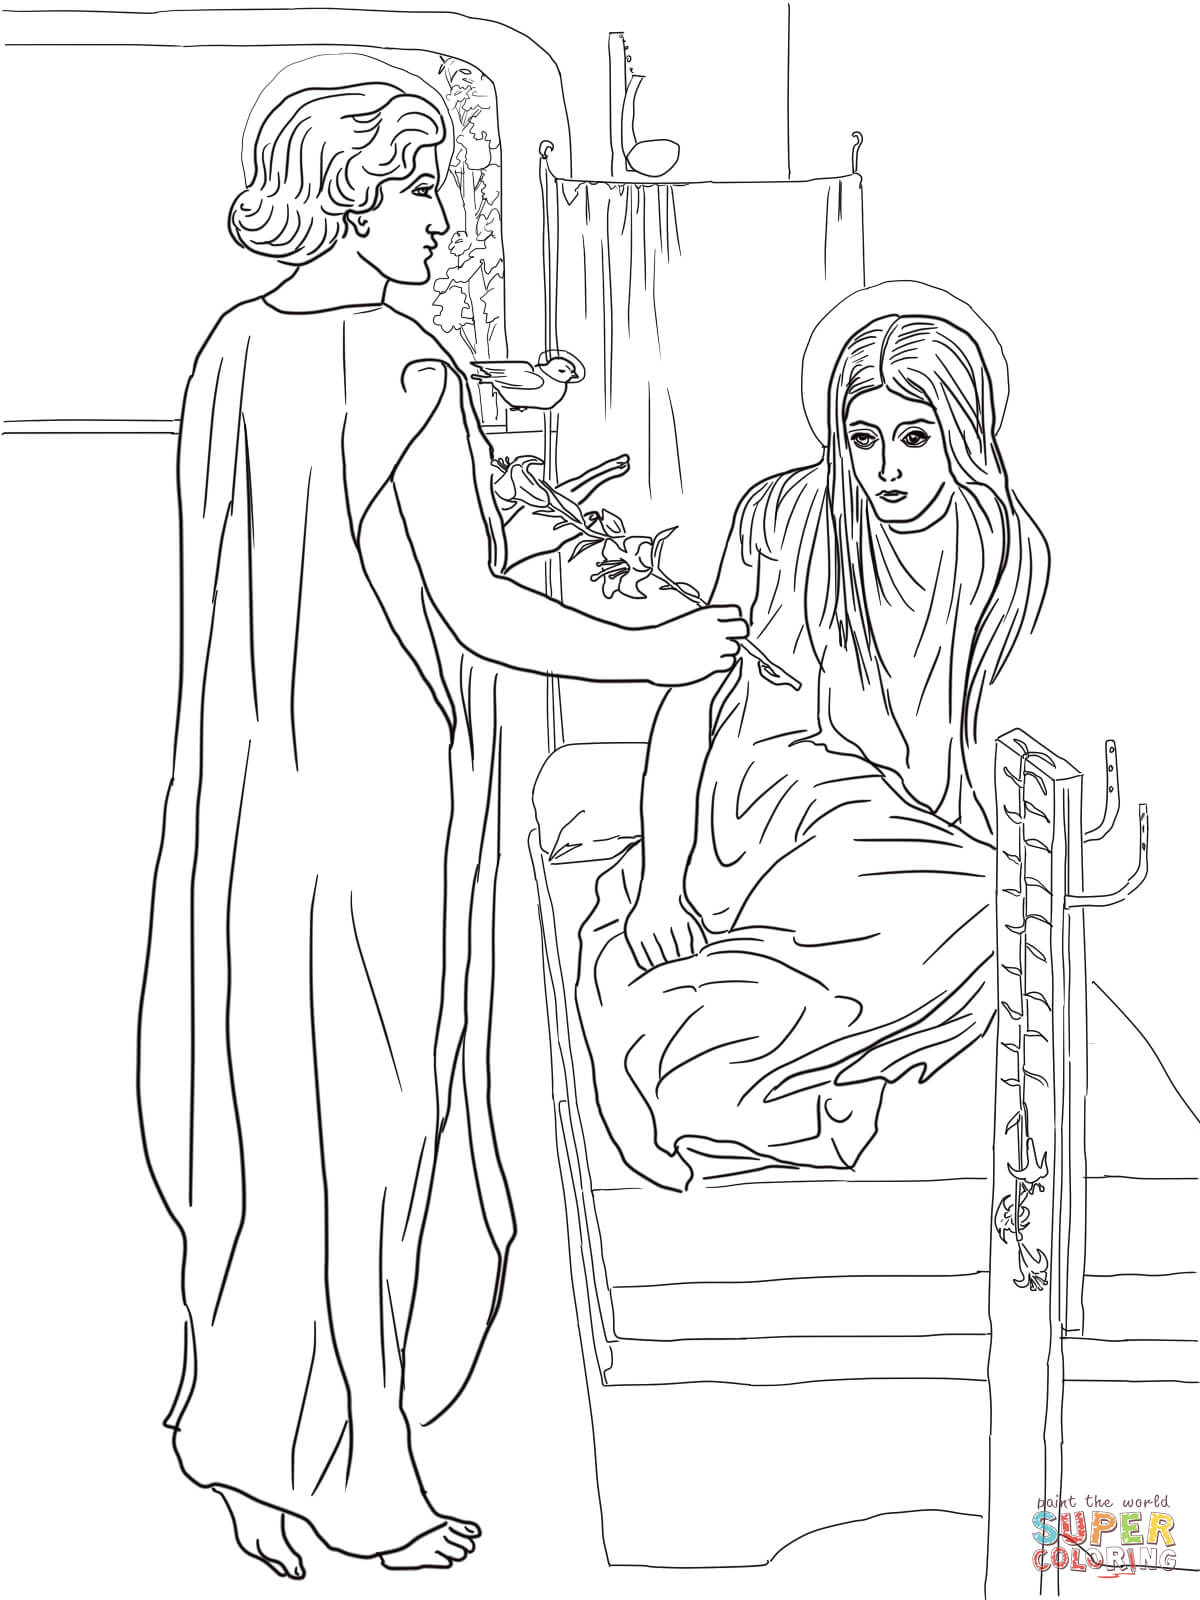 Virgin Mary Coloring Page - Coloring Home